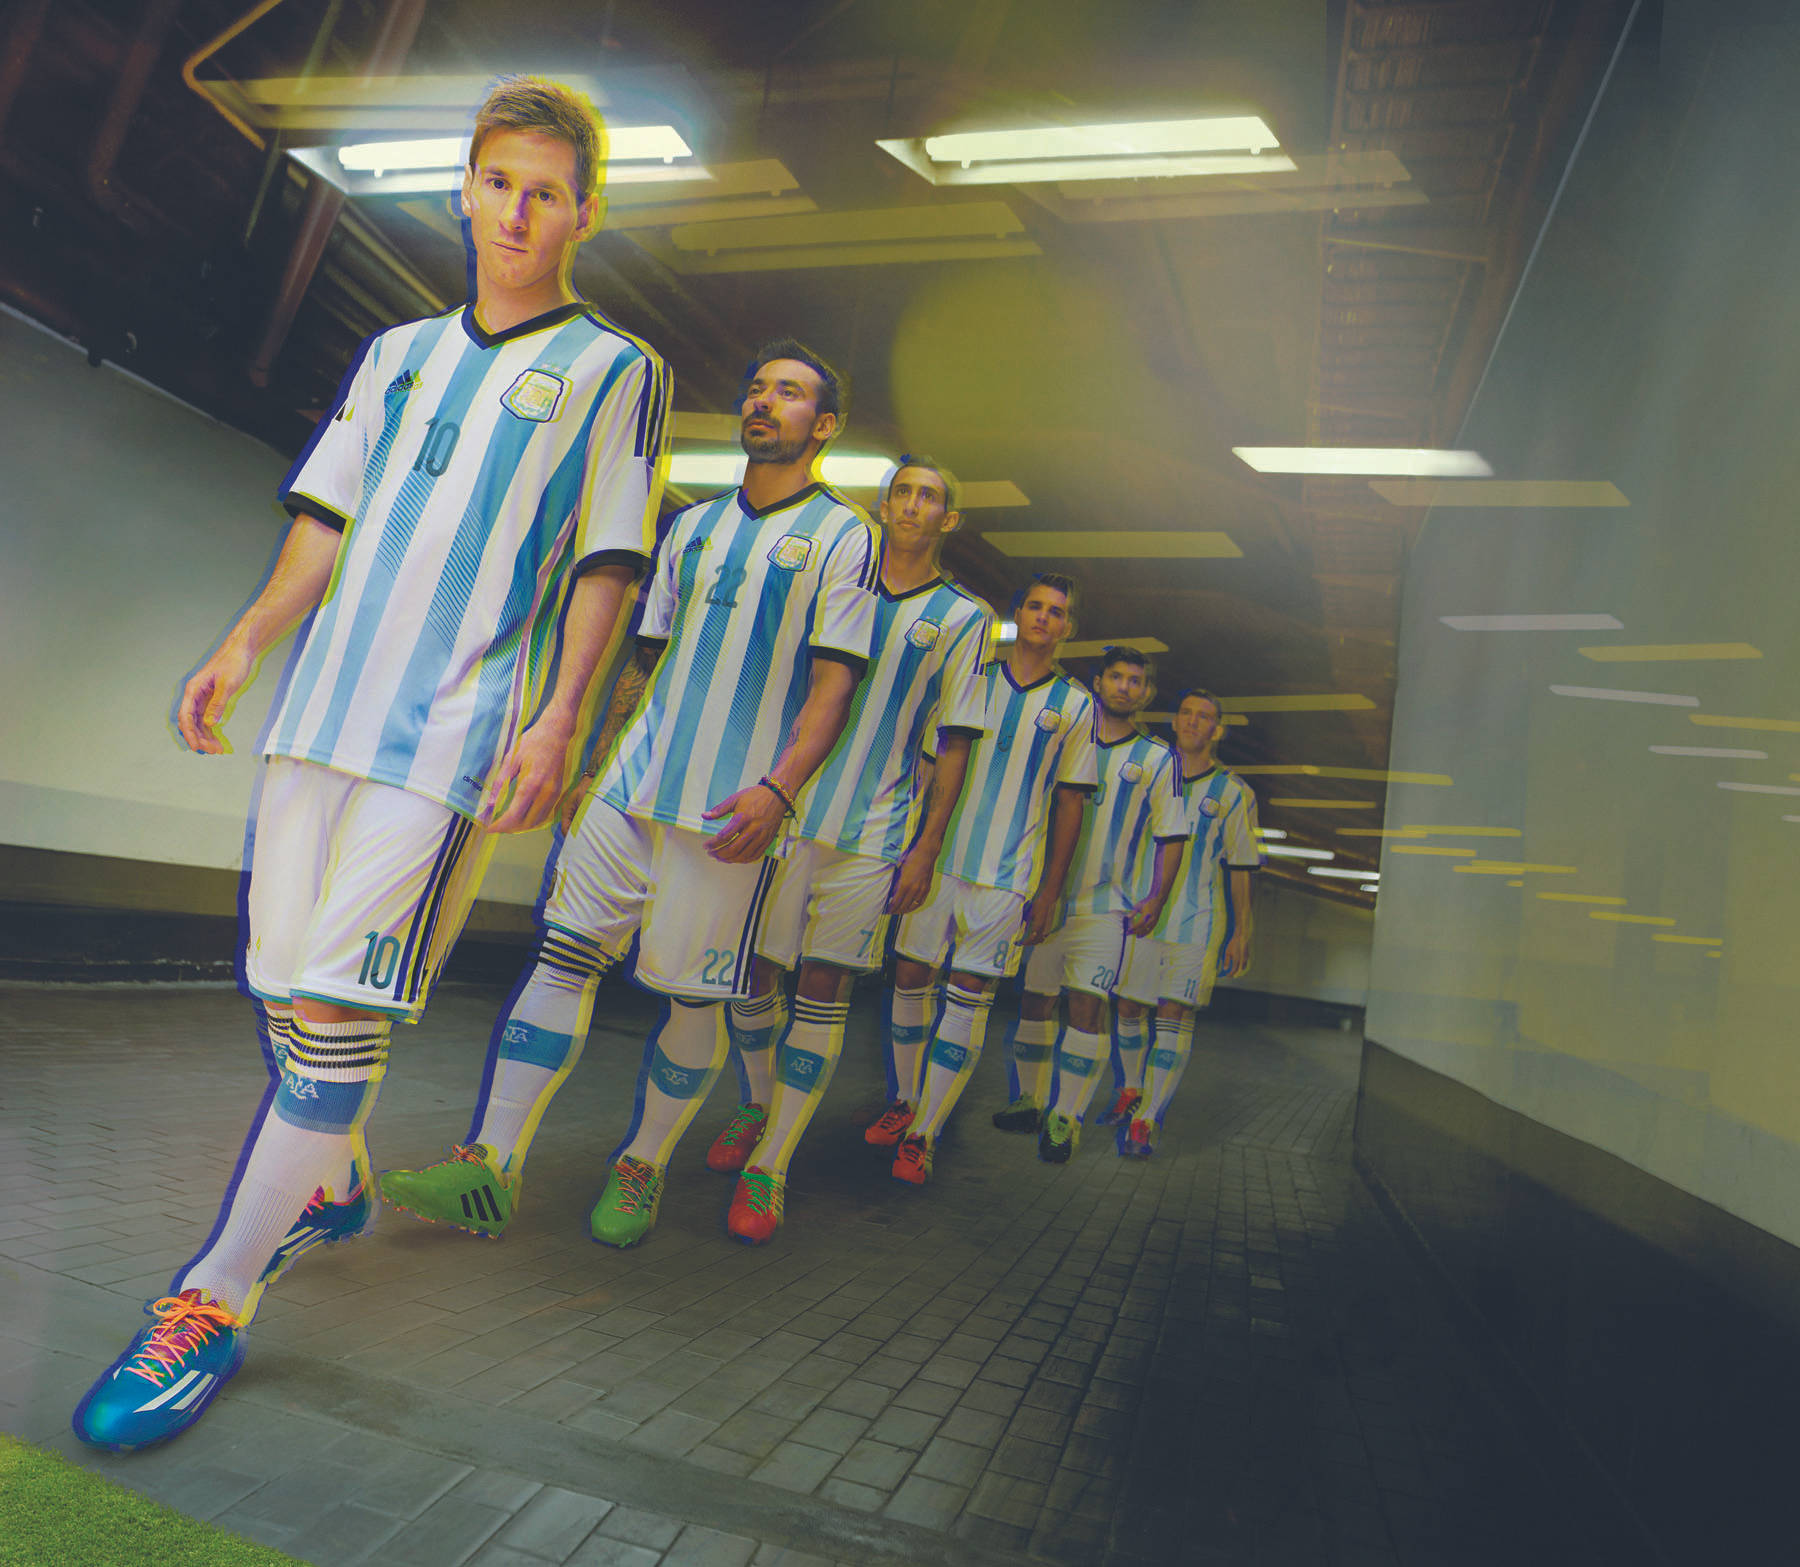 Argentina National Football Team Players In Hallway Background